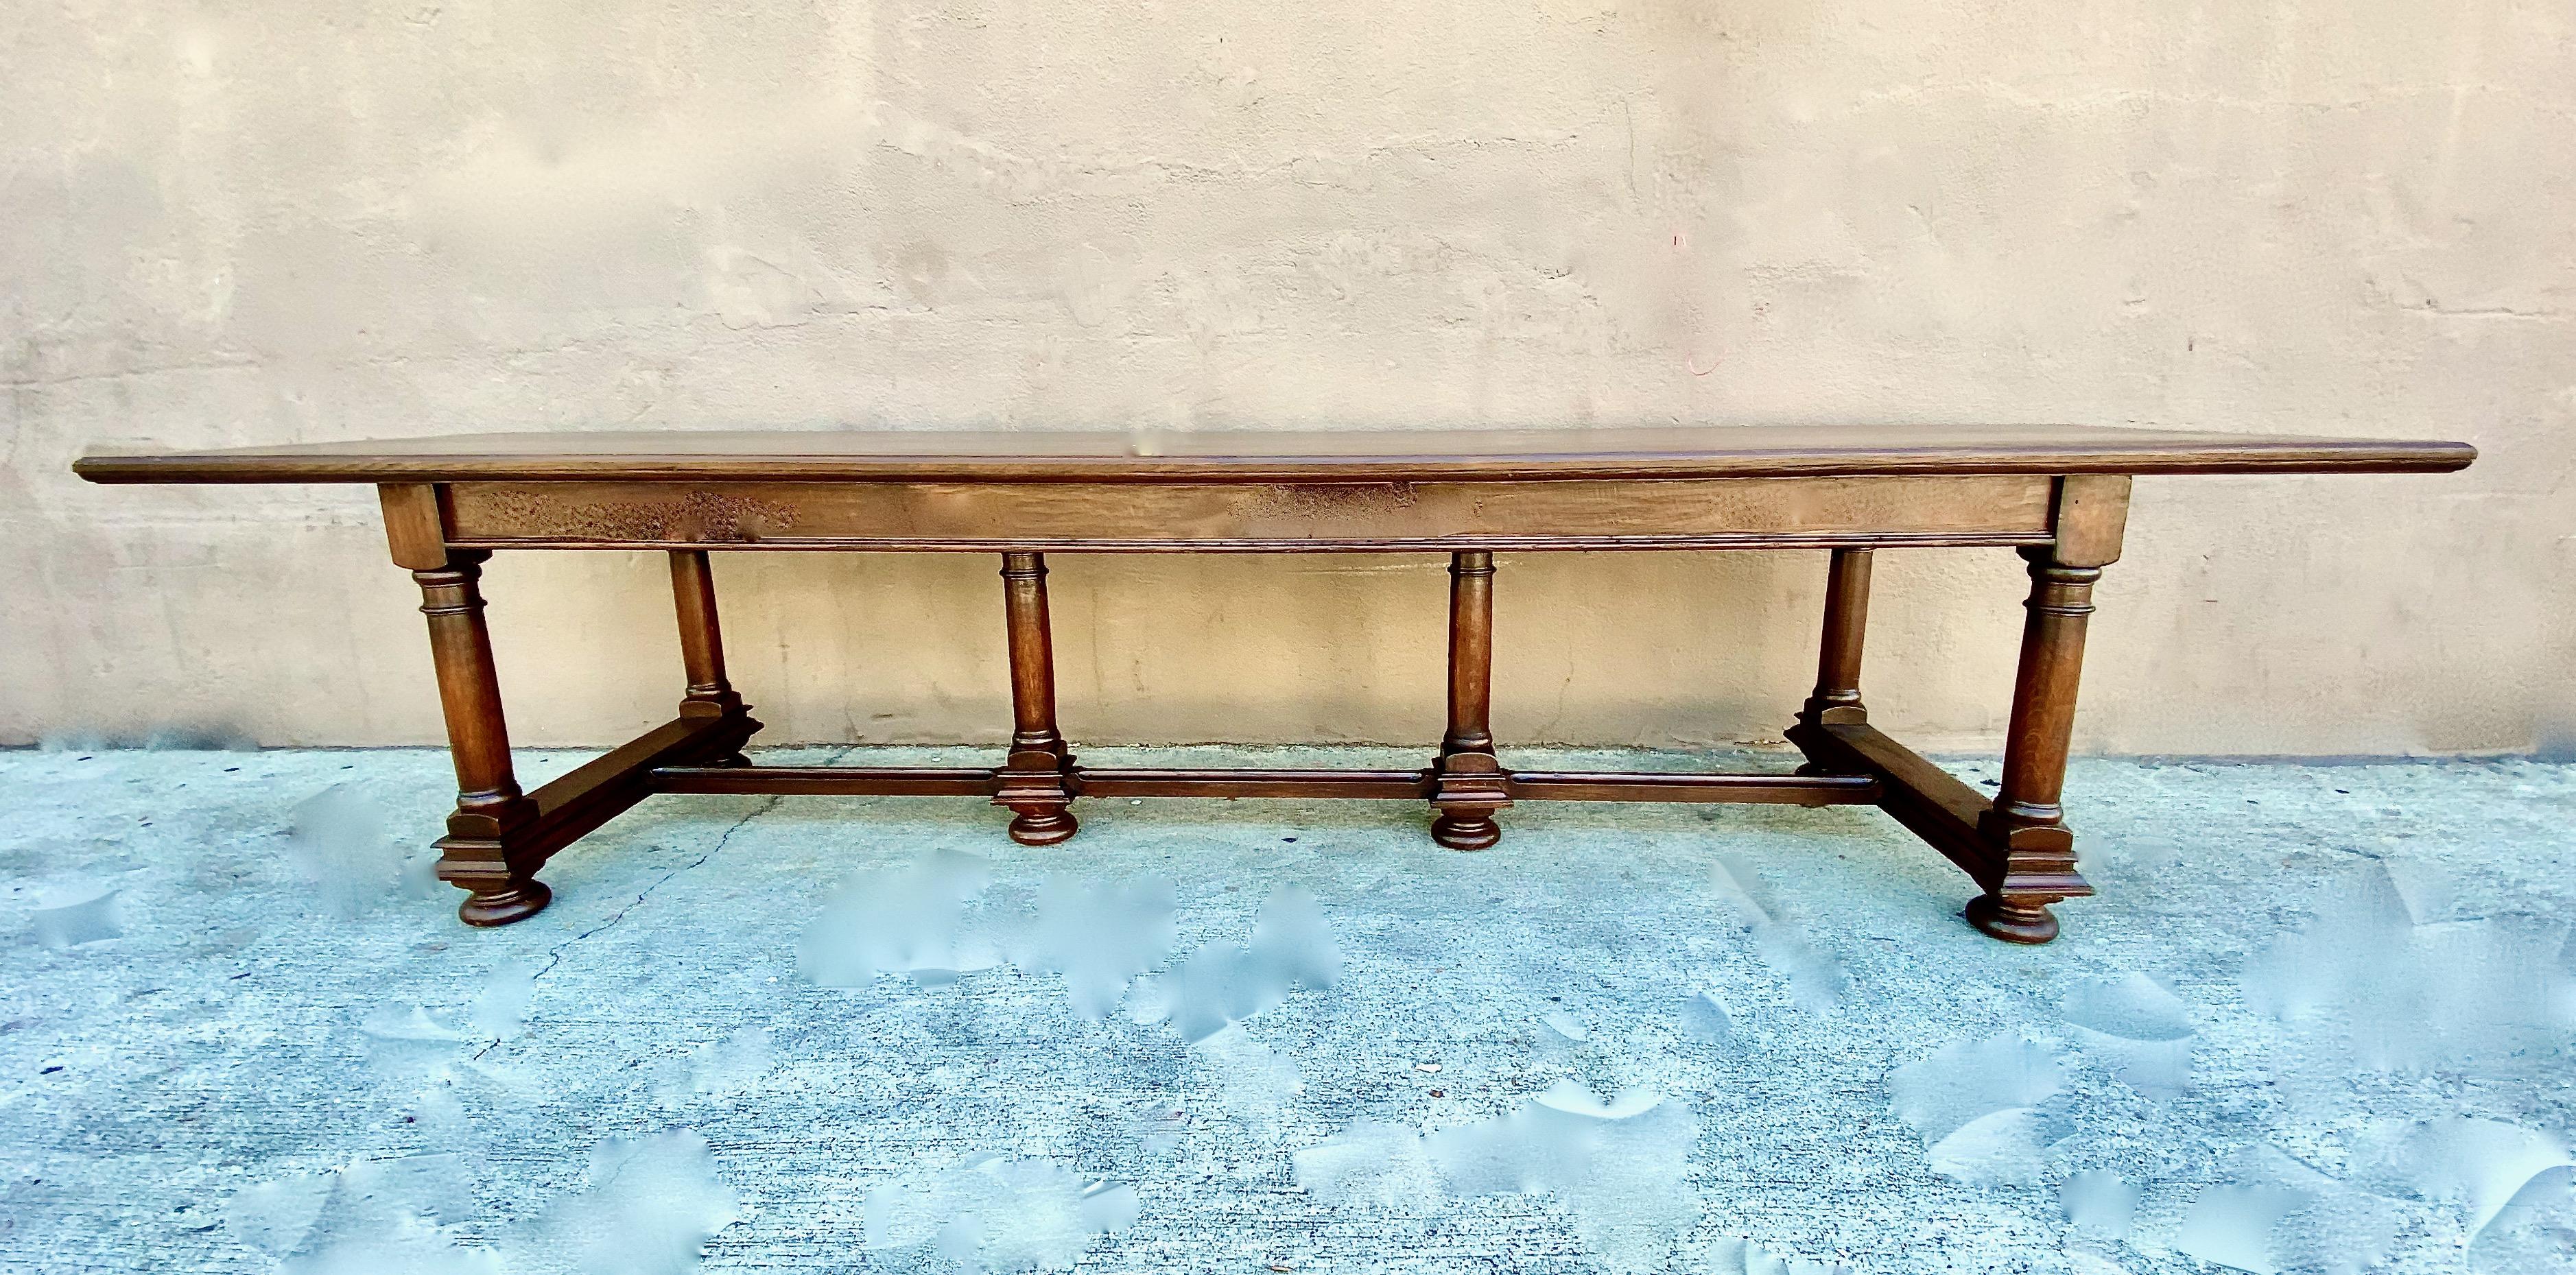 This is a long early to mid-20th century solid oak refectory table. The Italian Baroque style table is in very good to excellent condition with minor natural patina. Tables of this size and quality of construction are uncommon. The table measures: